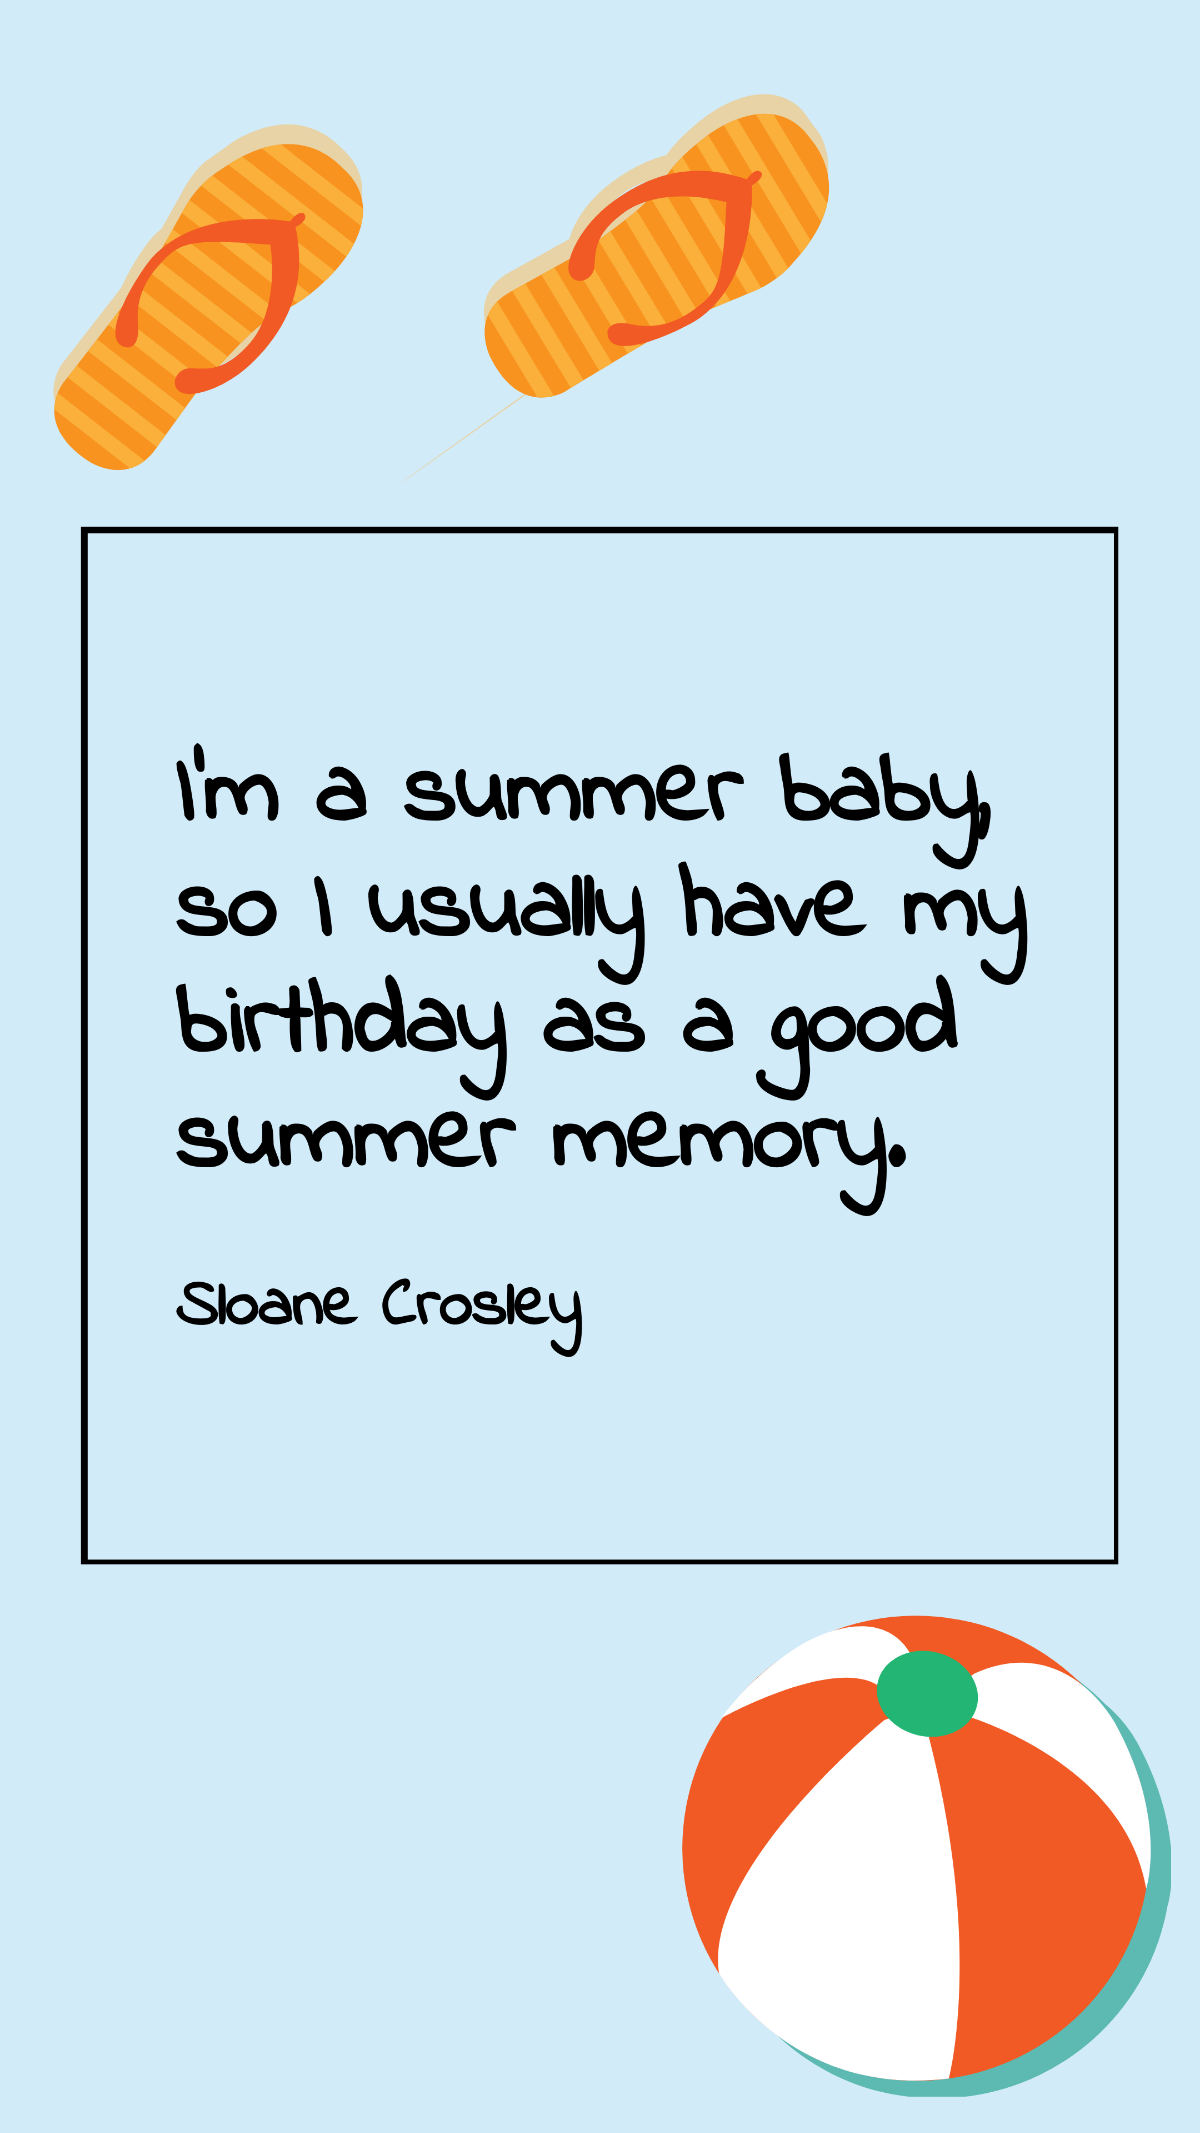 Sloane Crosley - I'm a summer baby, so I usually have my birthday as a good summer memory. Template